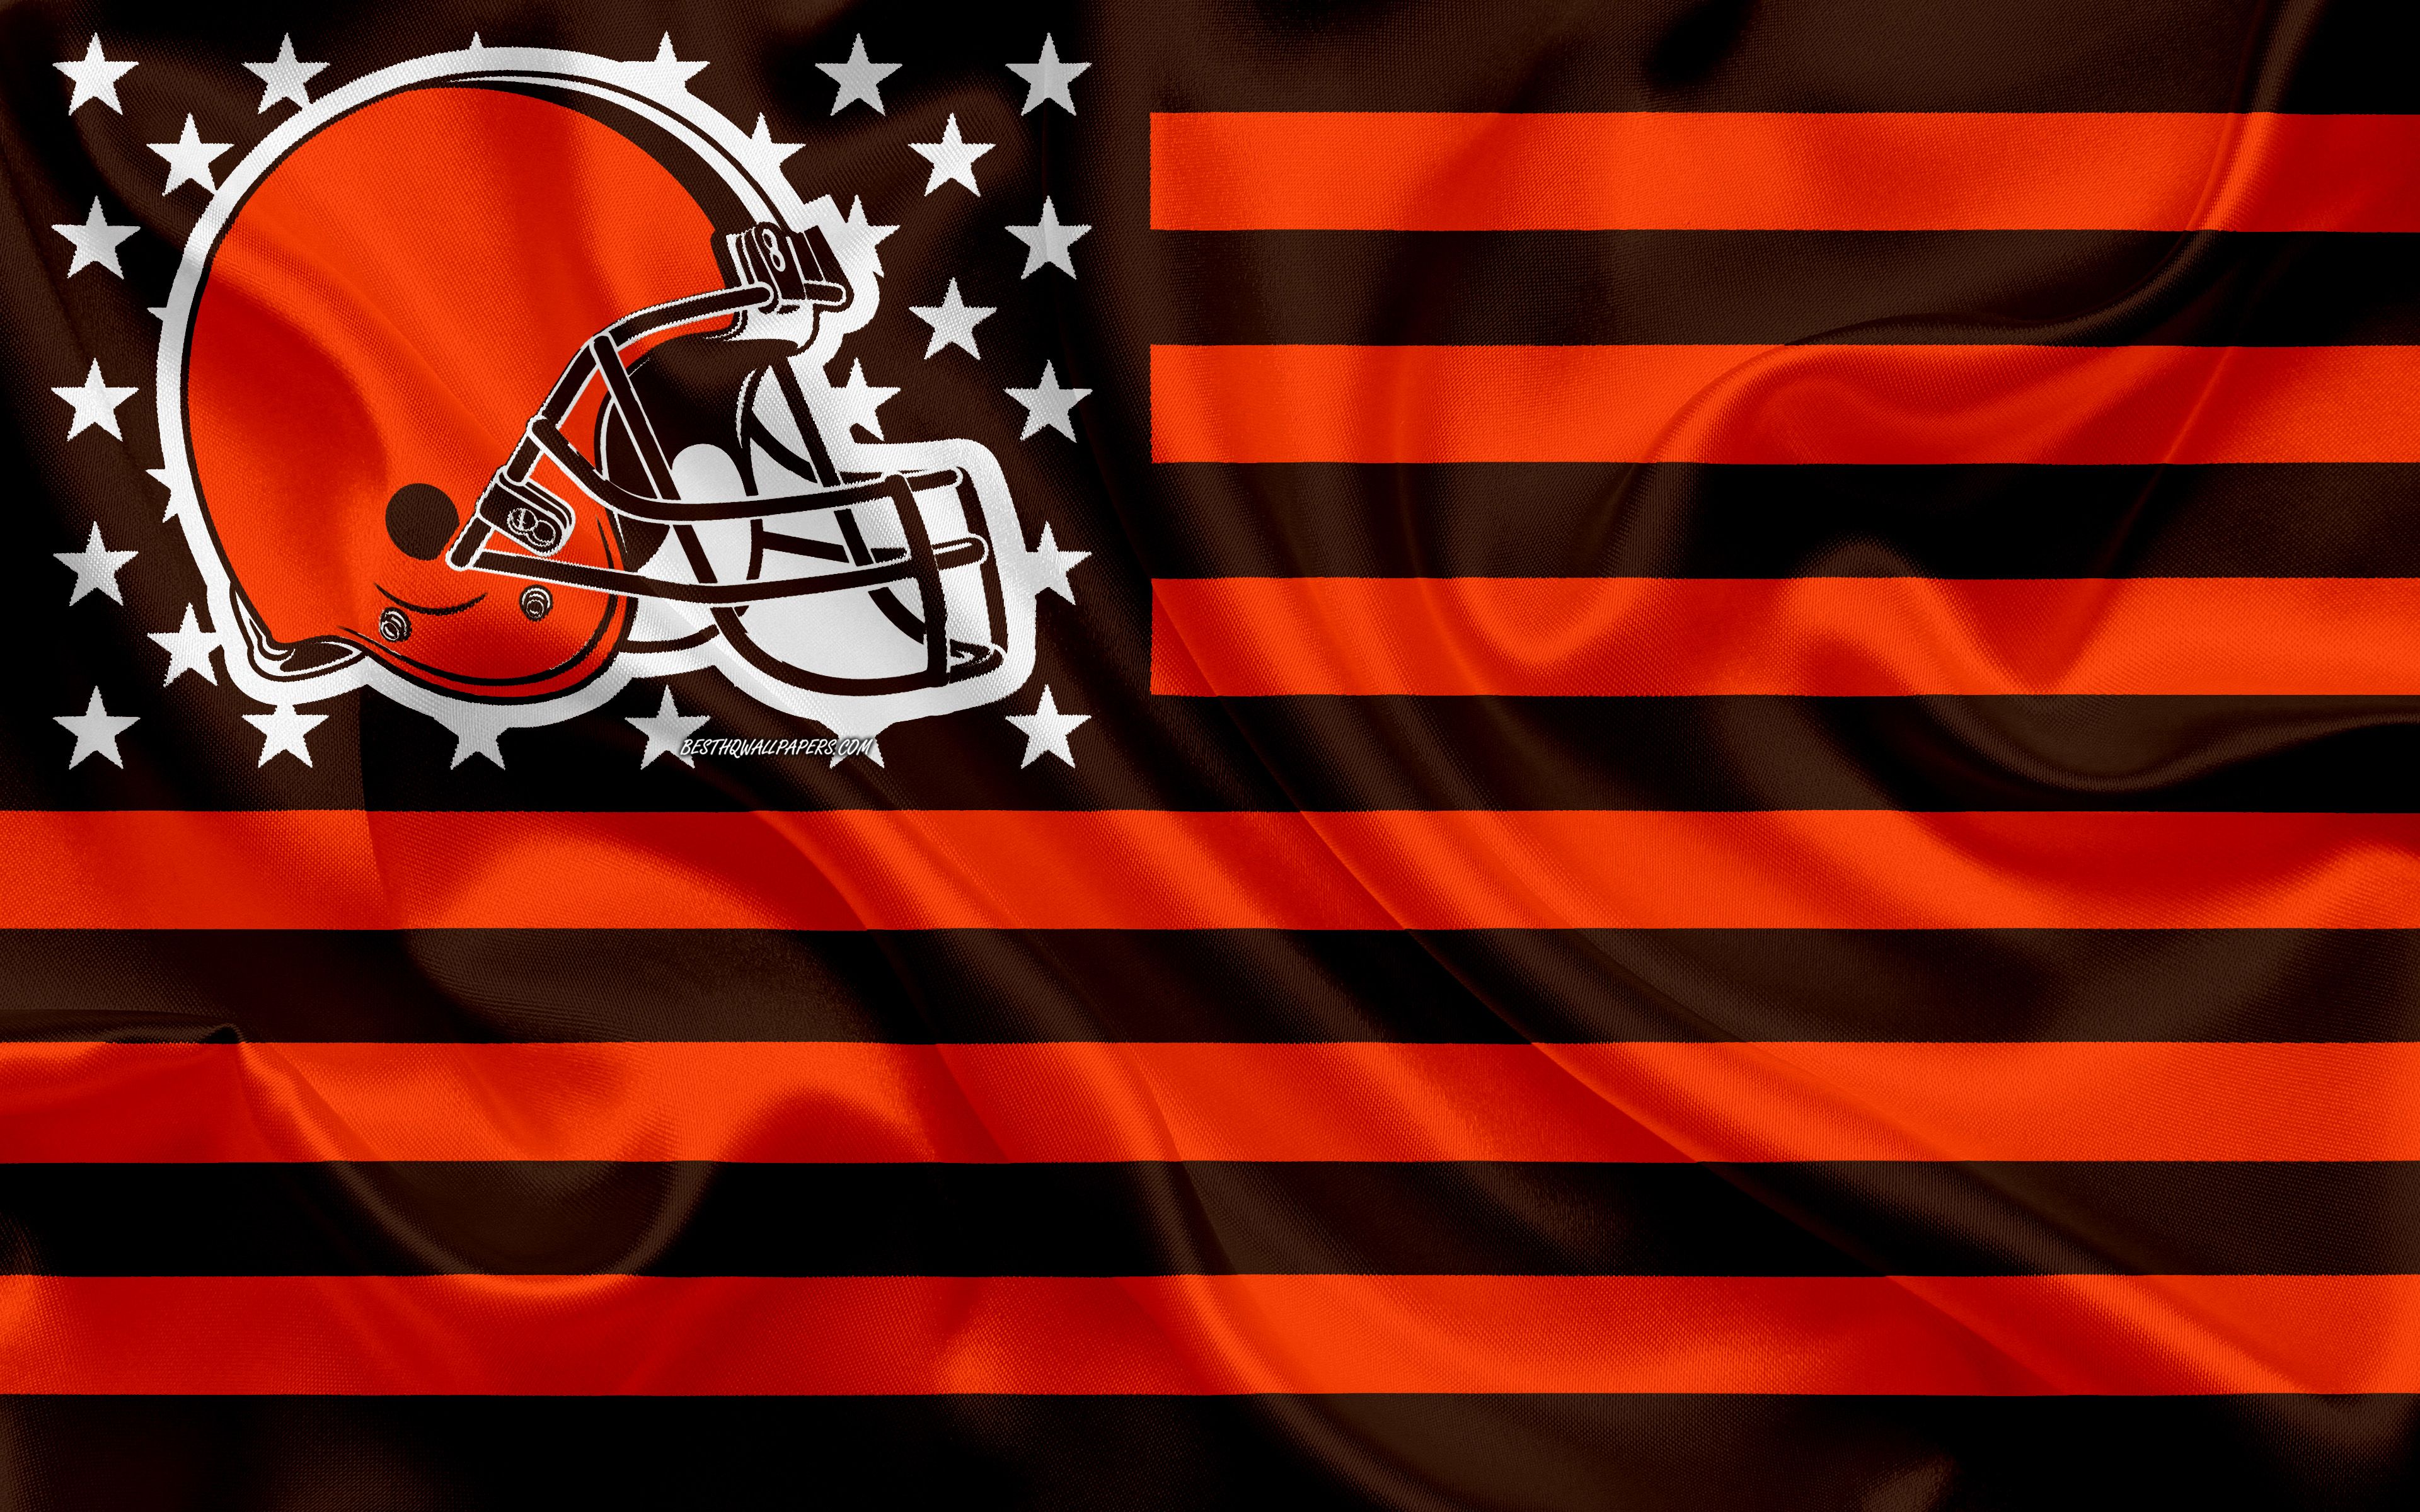 Download wallpaper Cleveland Browns, American football team